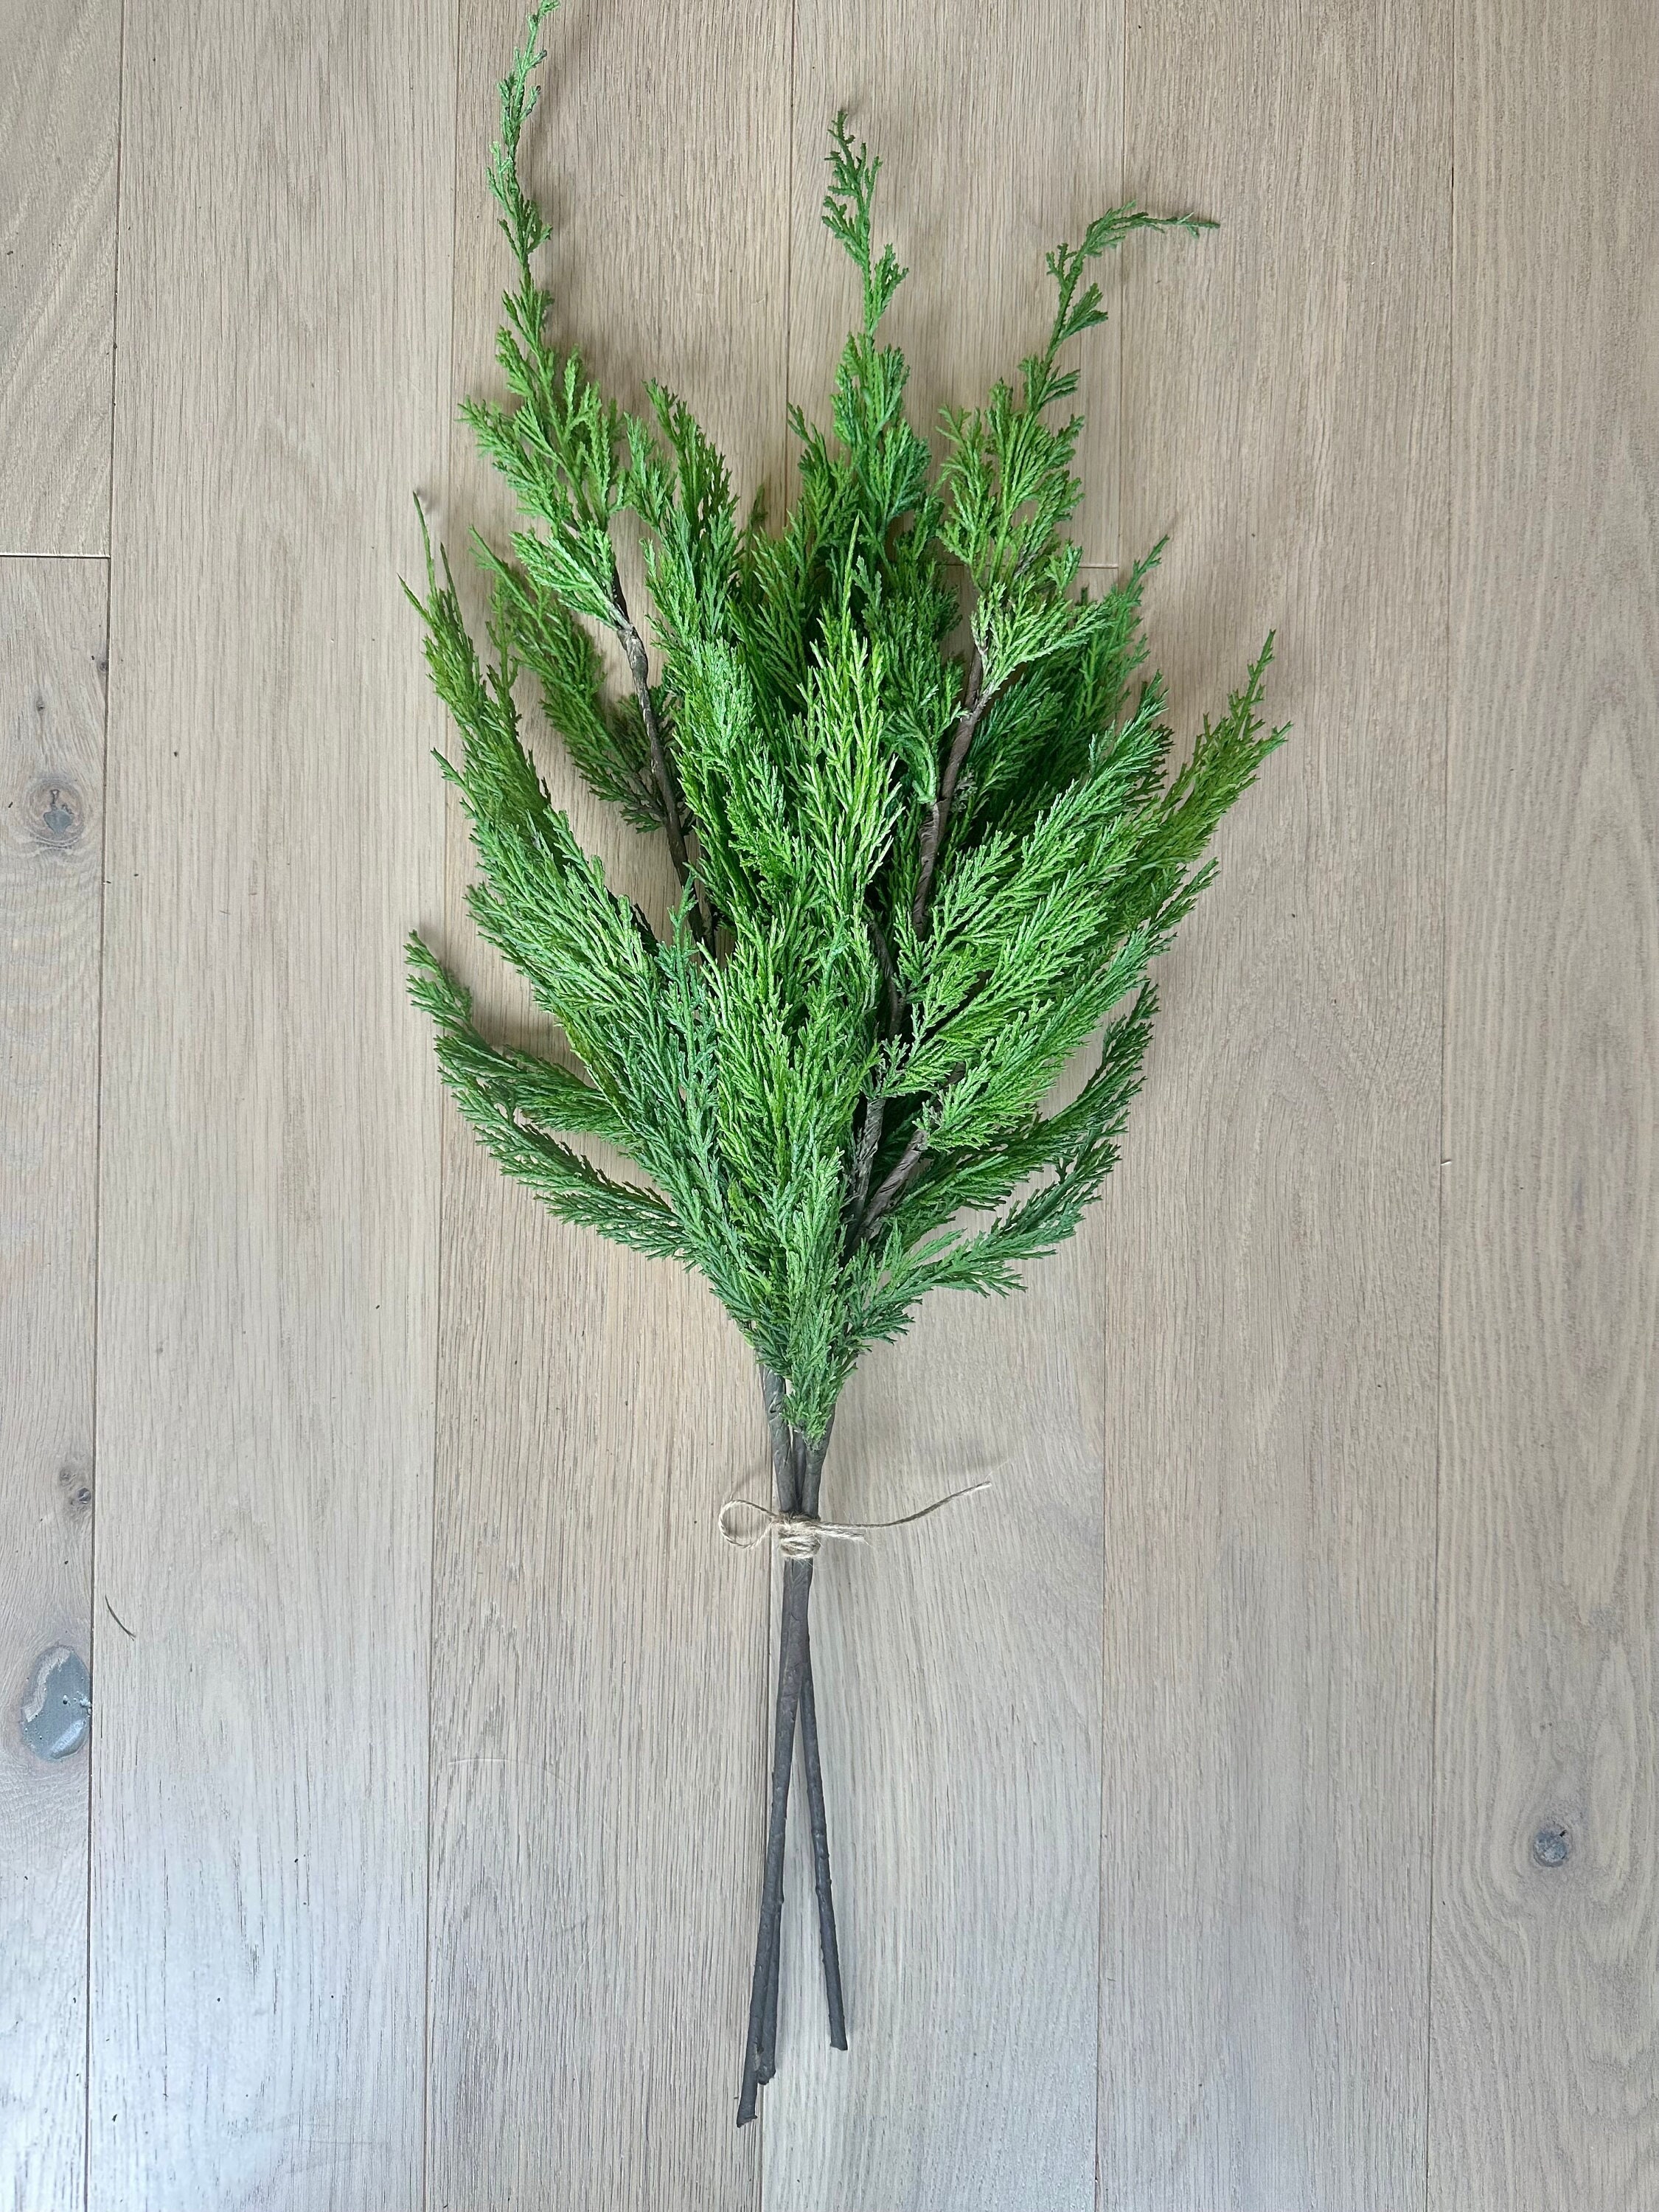 Pine Branches / Green Dried Antlers Pine 2-5 Stems / Preserved